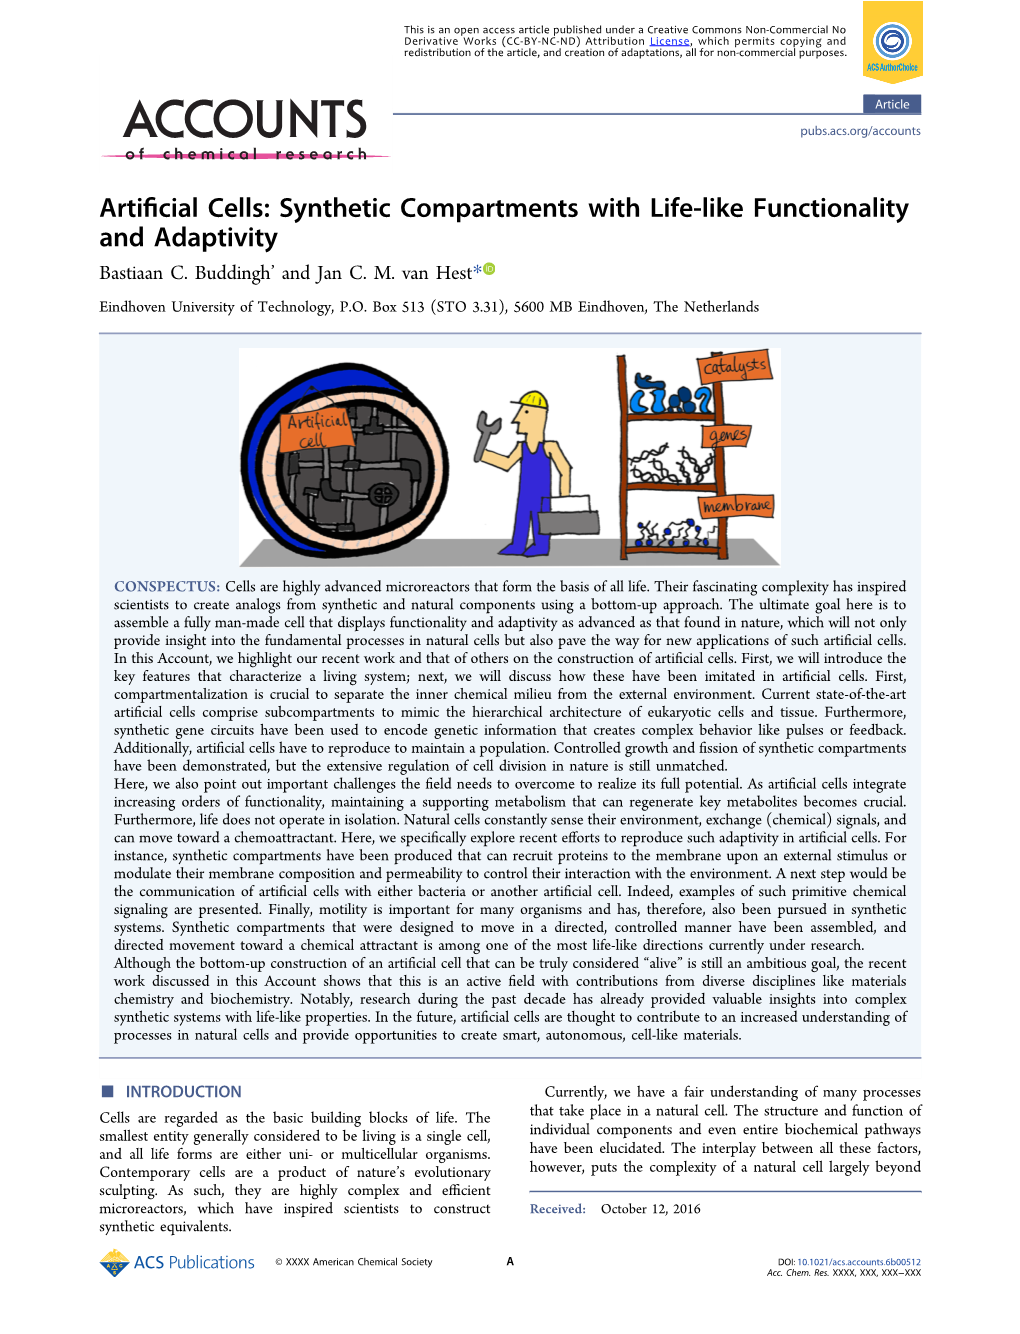 Artificial Cells: Synthetic Compartments with Life-Like Functionality and Adaptivity